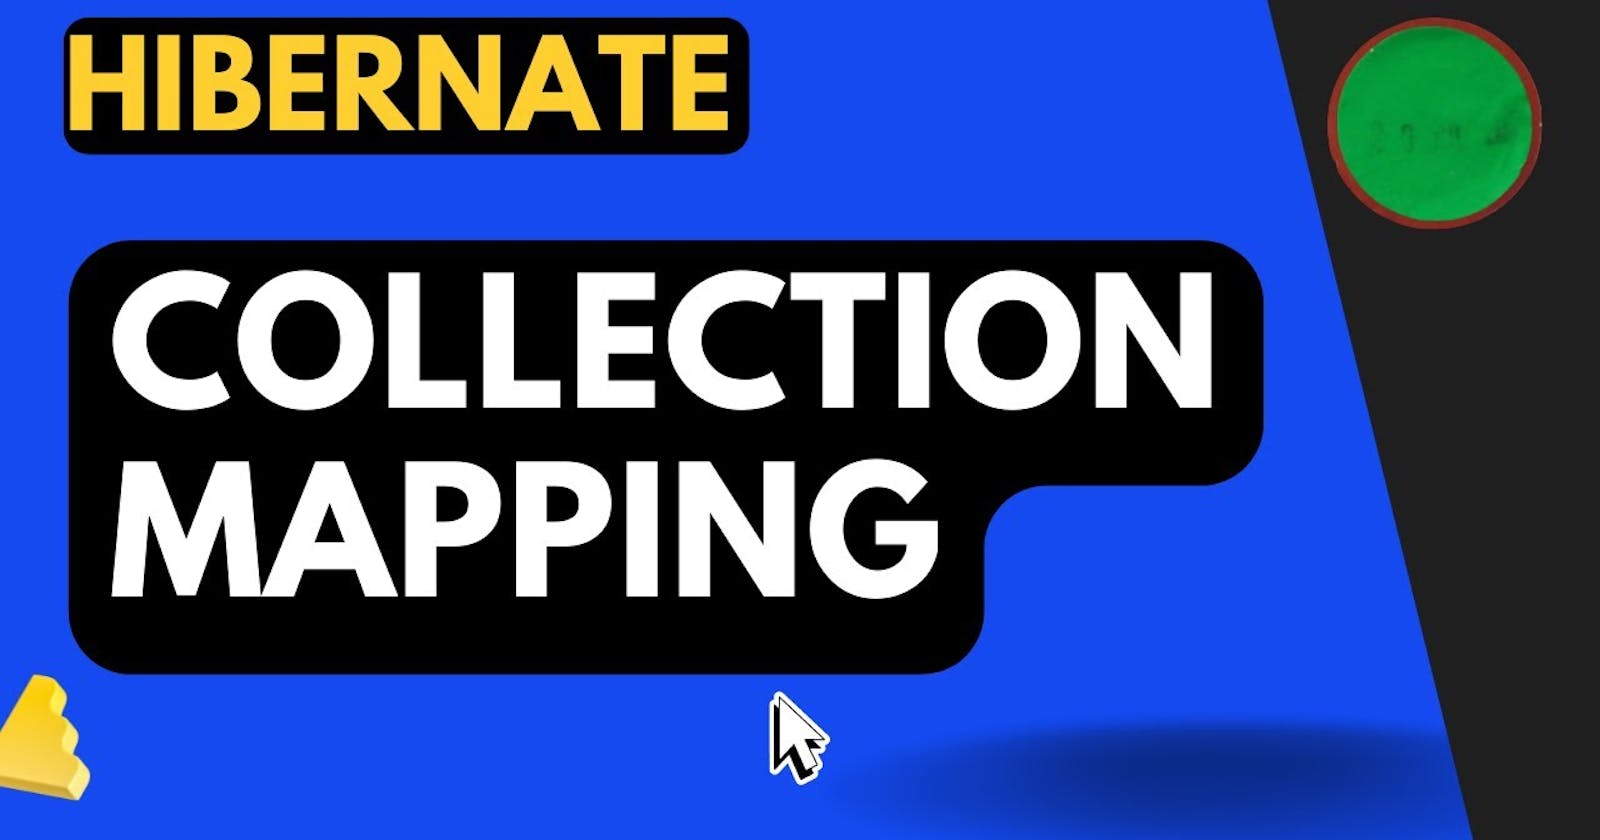 Collection Mapping in Hibernate